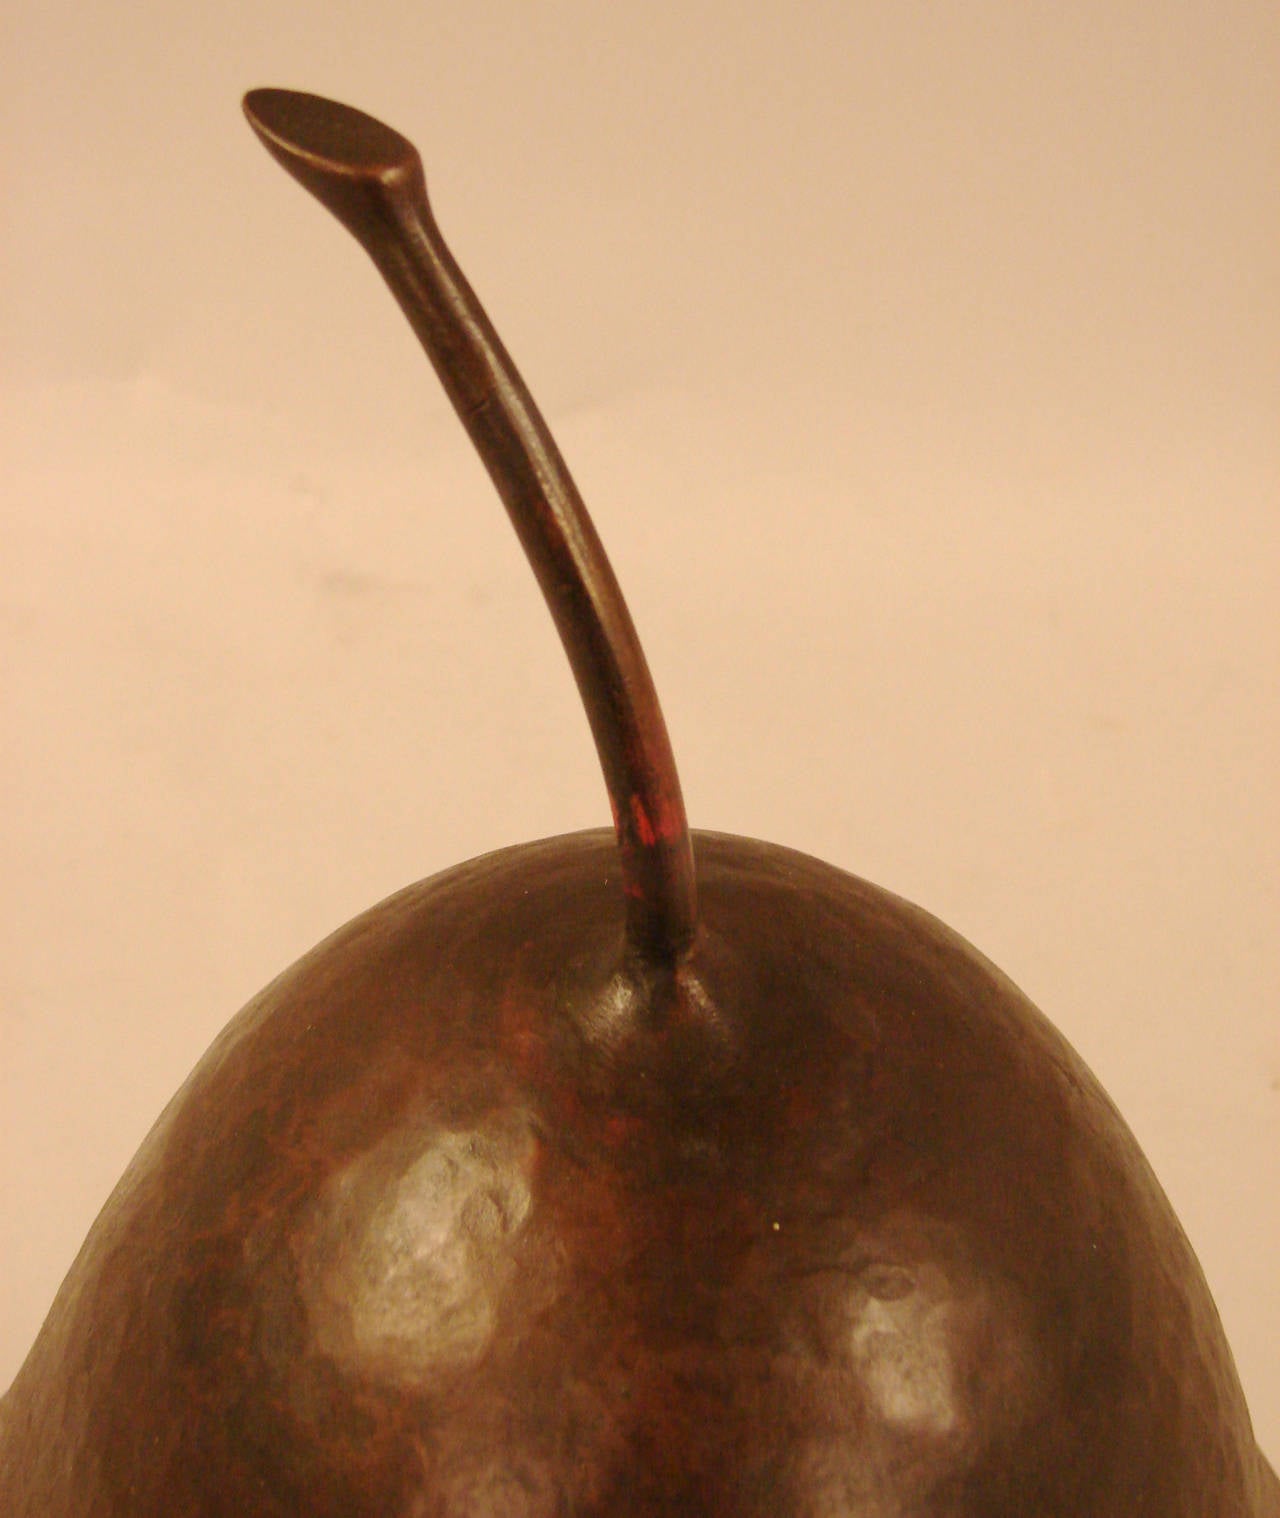 A large copper hammered pear by sculpture Robert Kuo, circa 1990.